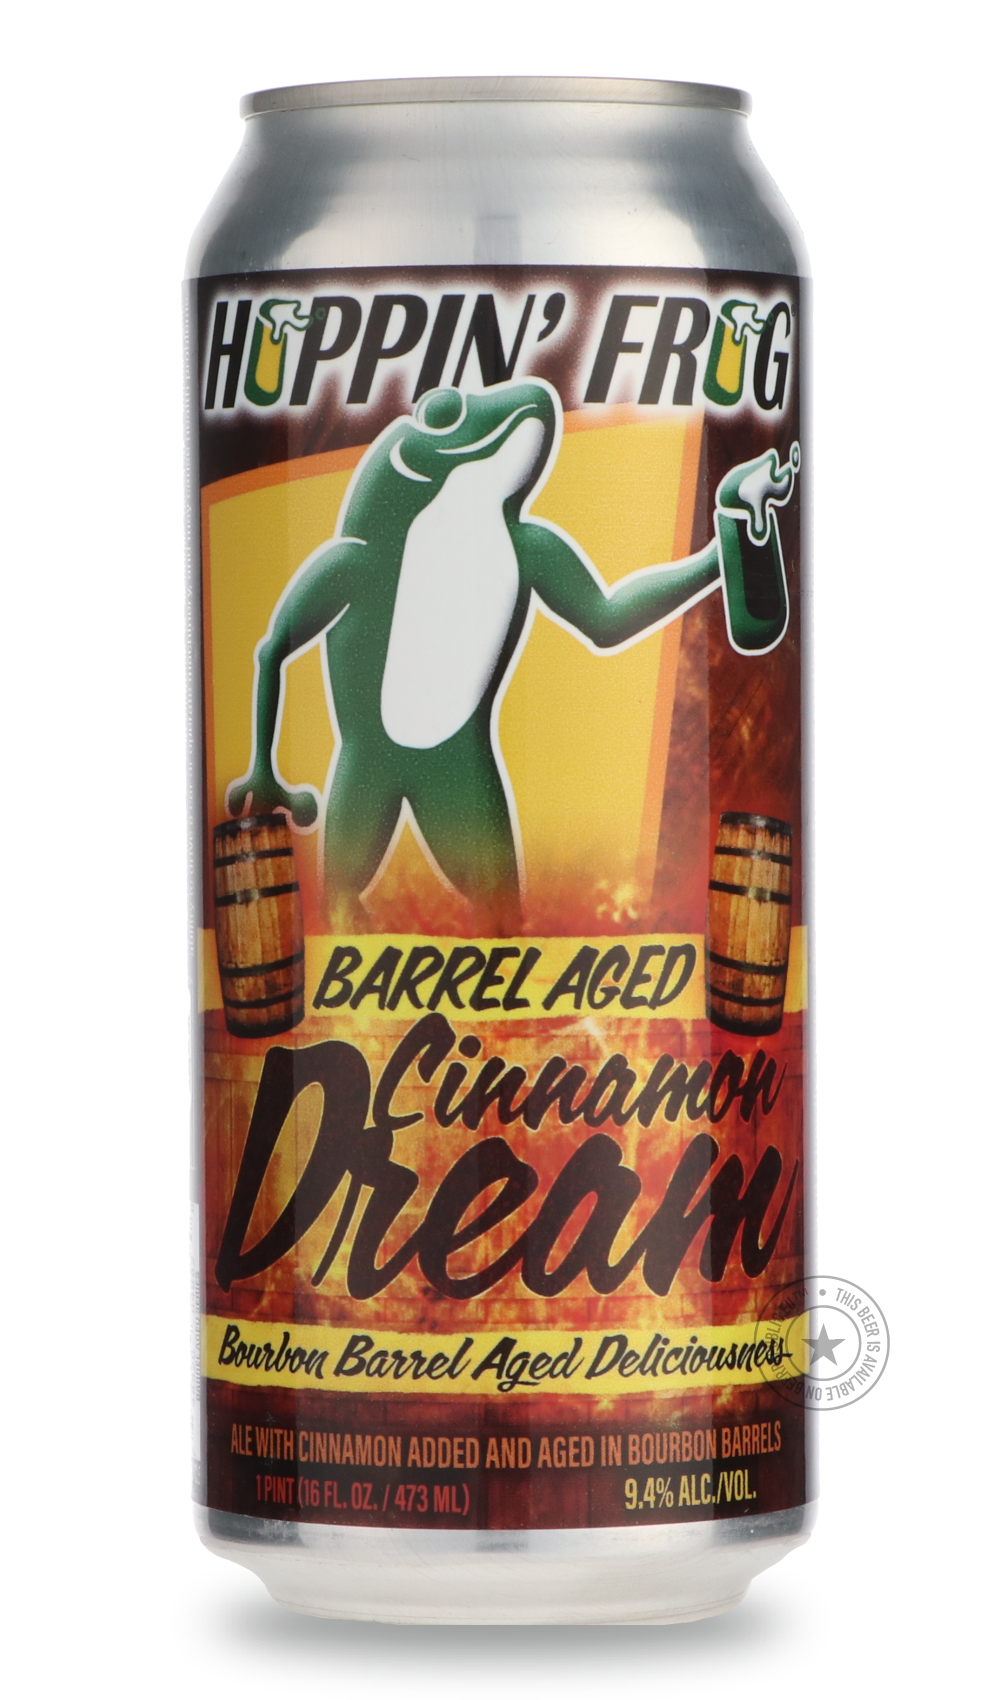 -Hoppin' Frog- Barrel Aged Cinnamon Dream-Specials- Only @ Beer Republic - The best online beer store for American & Canadian craft beer - Buy beer online from the USA and Canada - Bier online kopen - Amerikaans bier kopen - Craft beer store - Craft beer kopen - Amerikanisch bier kaufen - Bier online kaufen - Acheter biere online - IPA - Stout - Porter - New England IPA - Hazy IPA - Imperial Stout - Barrel Aged - Barrel Aged Imperial Stout - Brown - Dark beer - Blond - Blonde - Pilsner - Lager - Wheat - Wei